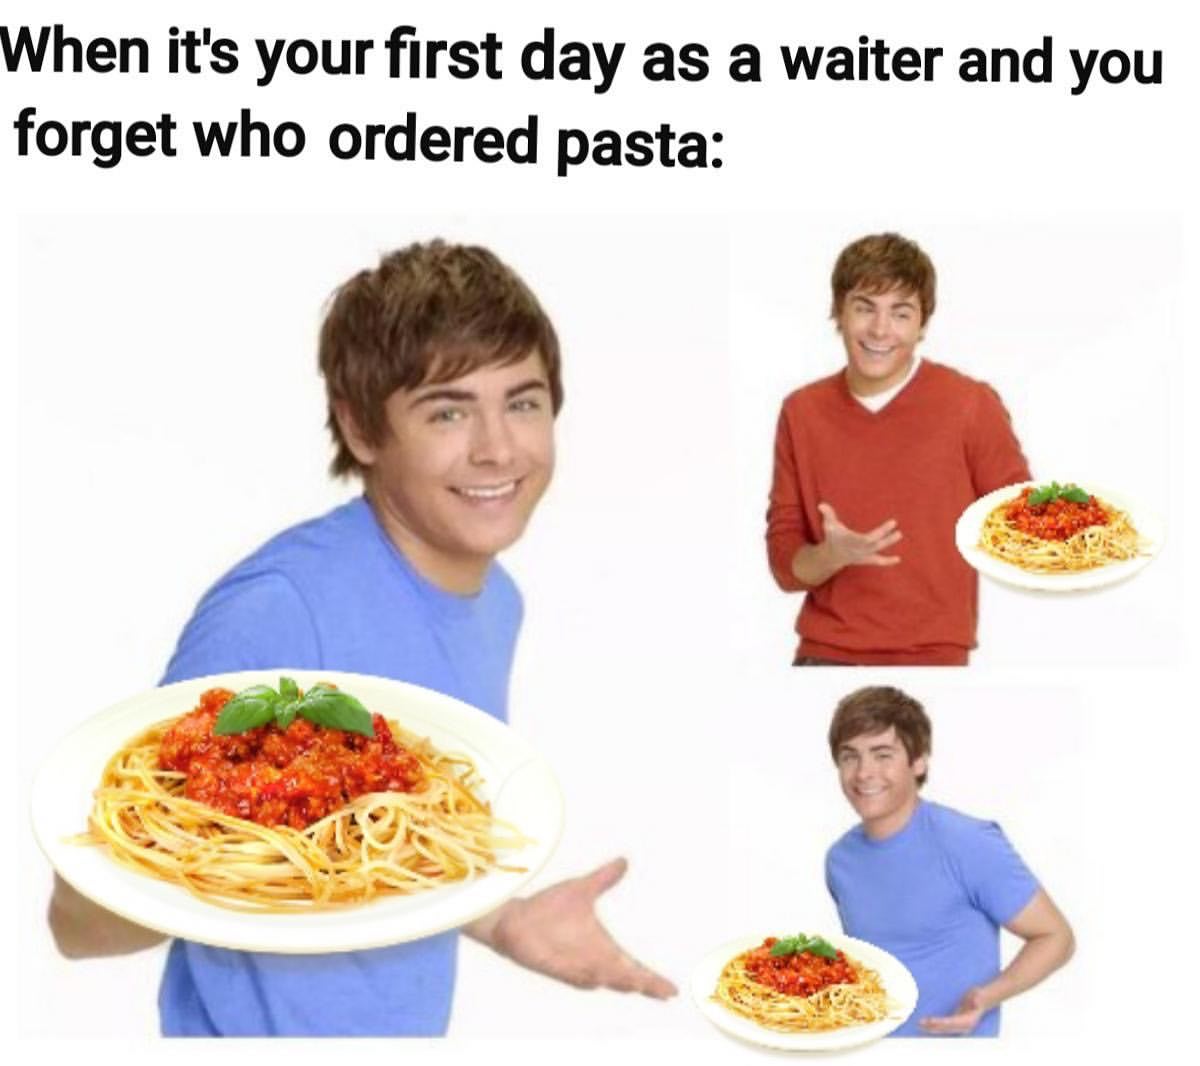 When it's your first day as a waiter and you forget who ordered pasta: